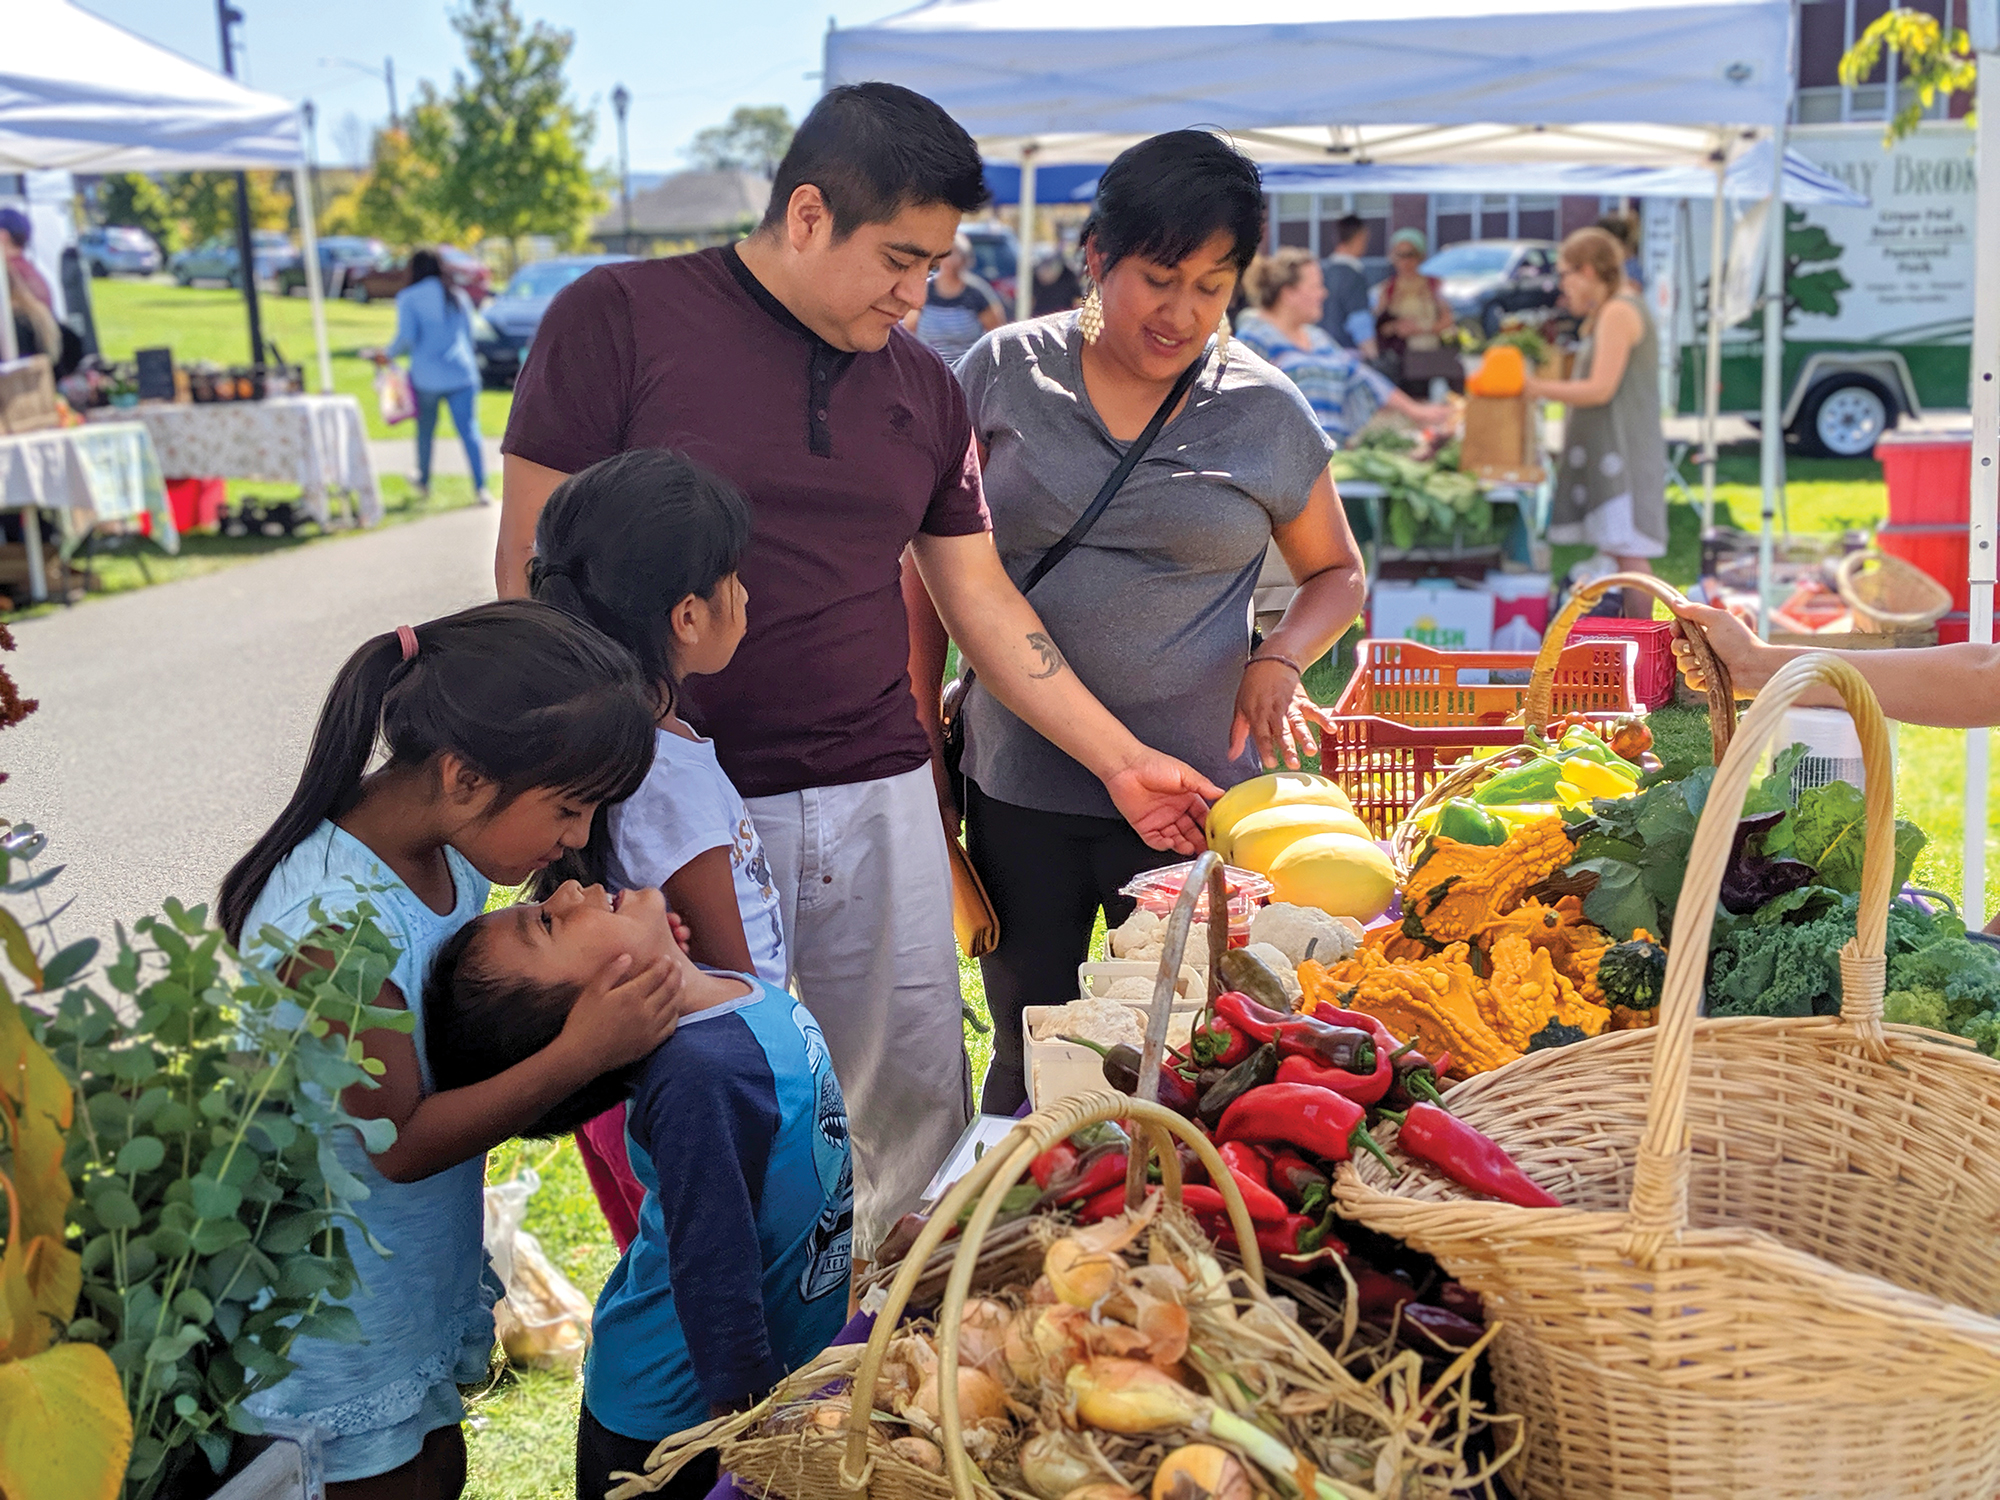 Family buying vegetables at Pittsfield farmer's market